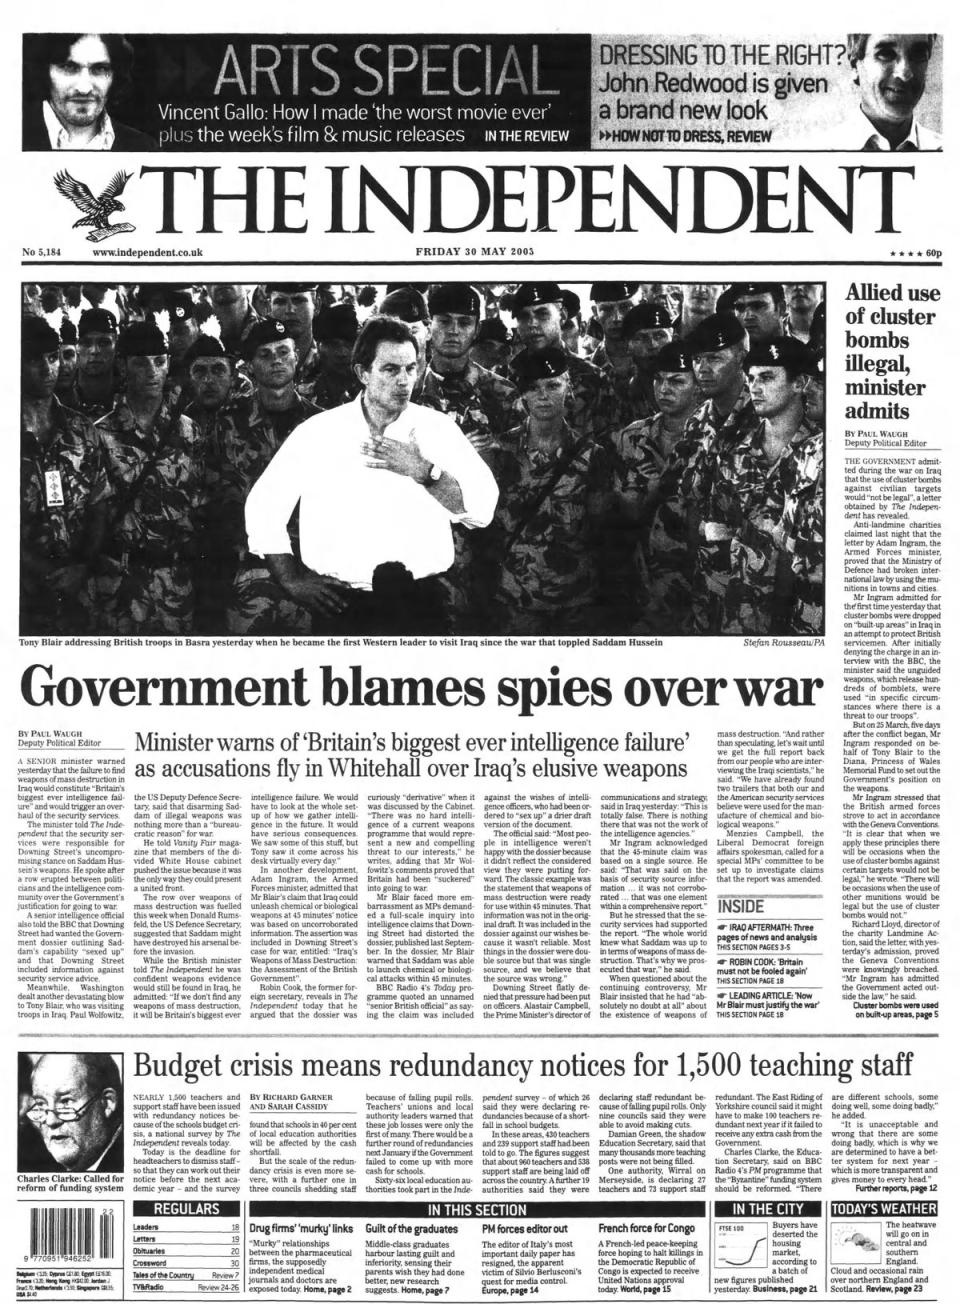 The Independent front page on 30 May 2003 (The Independent)